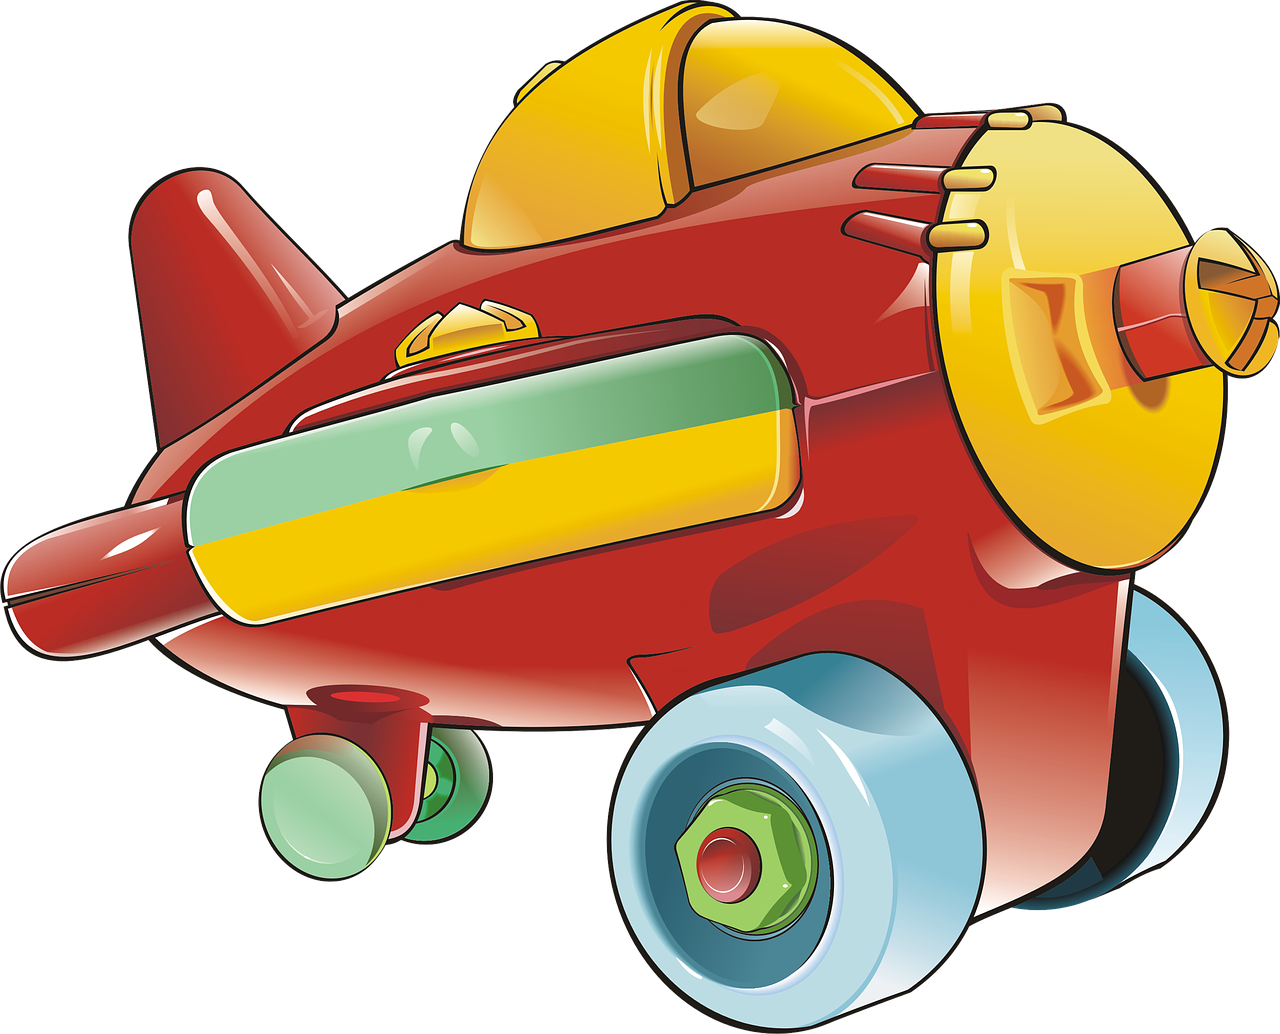 a red toy airplane with a yellow propeller, by Toyen, digital art, a car, multicolored vector art, hero shot, piggy